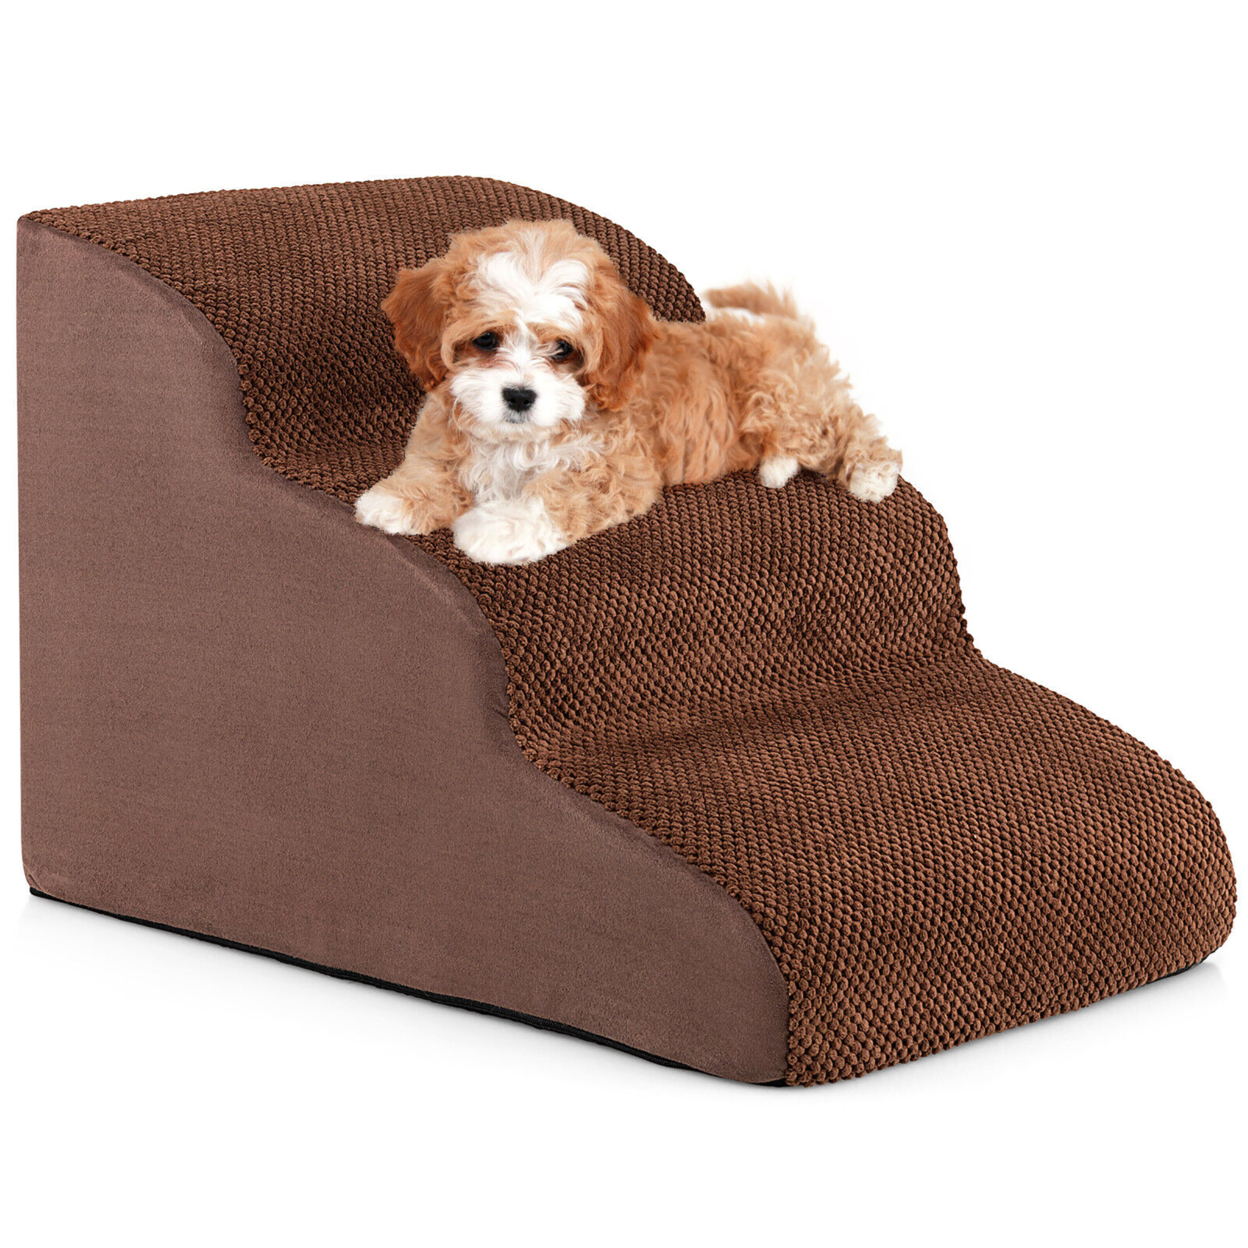 3 Tiers Foam Dog Ramps/Steps Non-Slip Dog Steps For Beds Or Couches Coffee